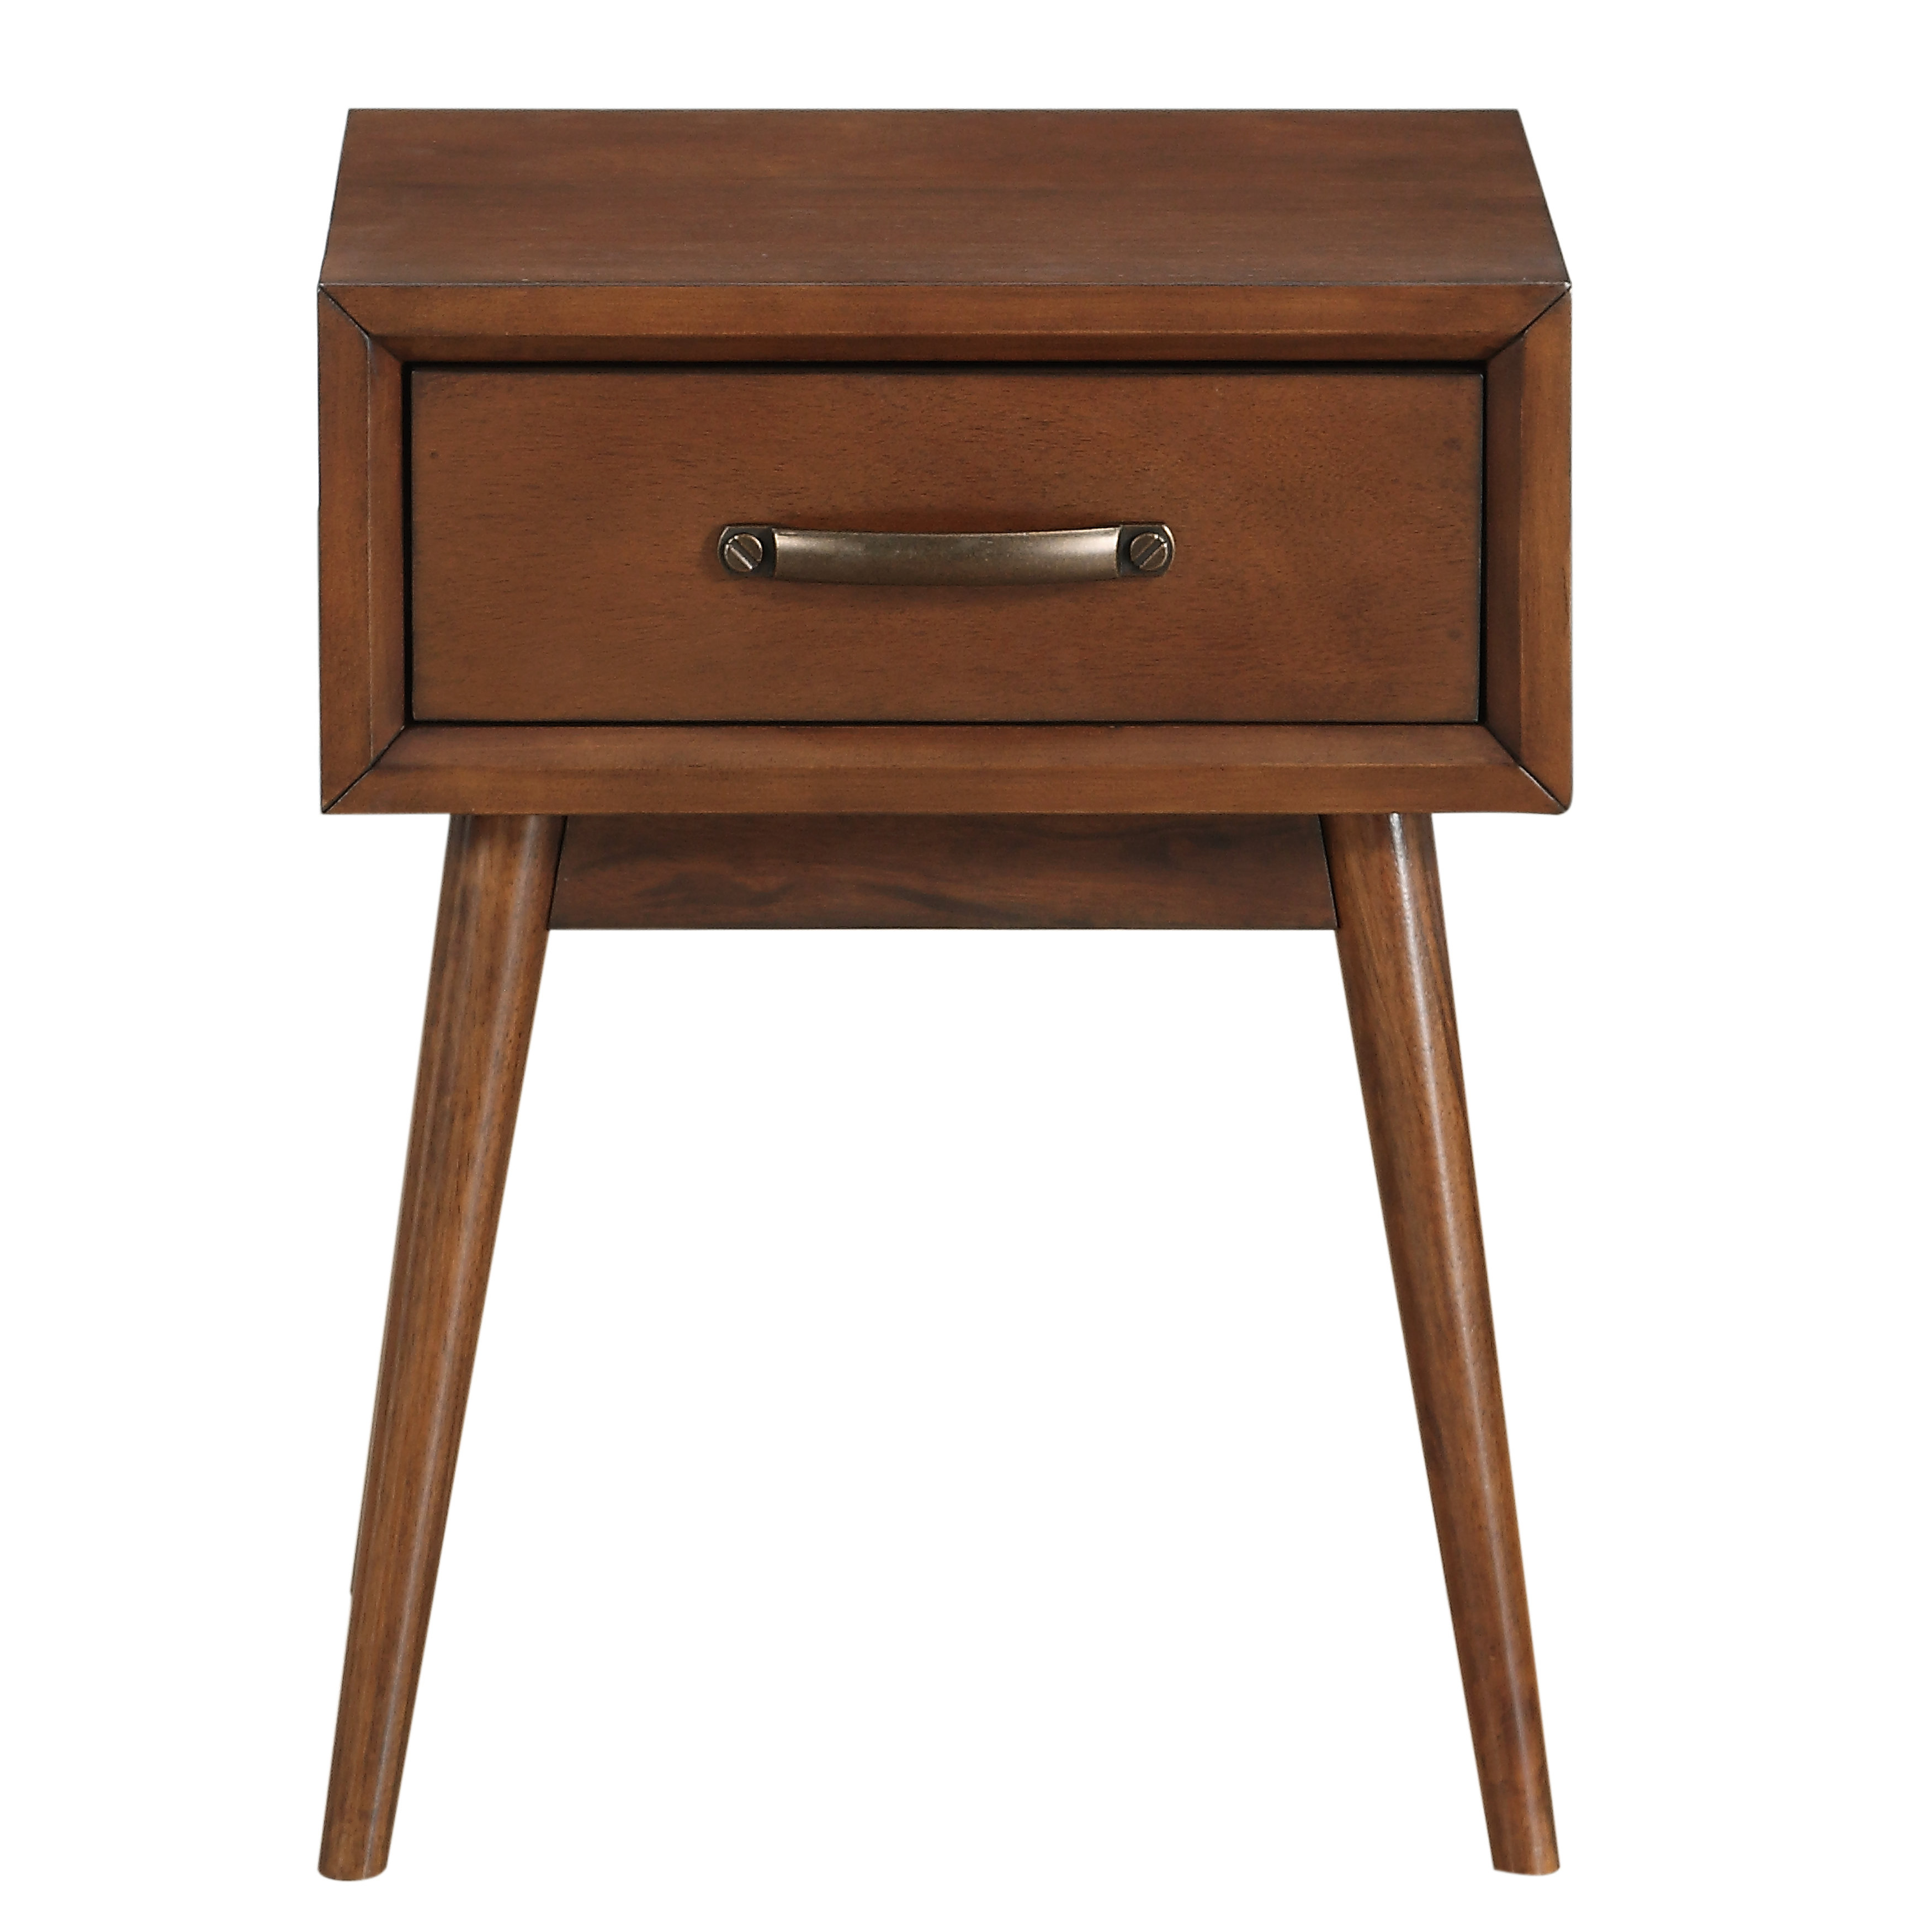 george oliver ripton mid century modern end table reviews furniture tables black with baskets kmart garden tools king coffee makeover farmhouse side bedside units large round oak